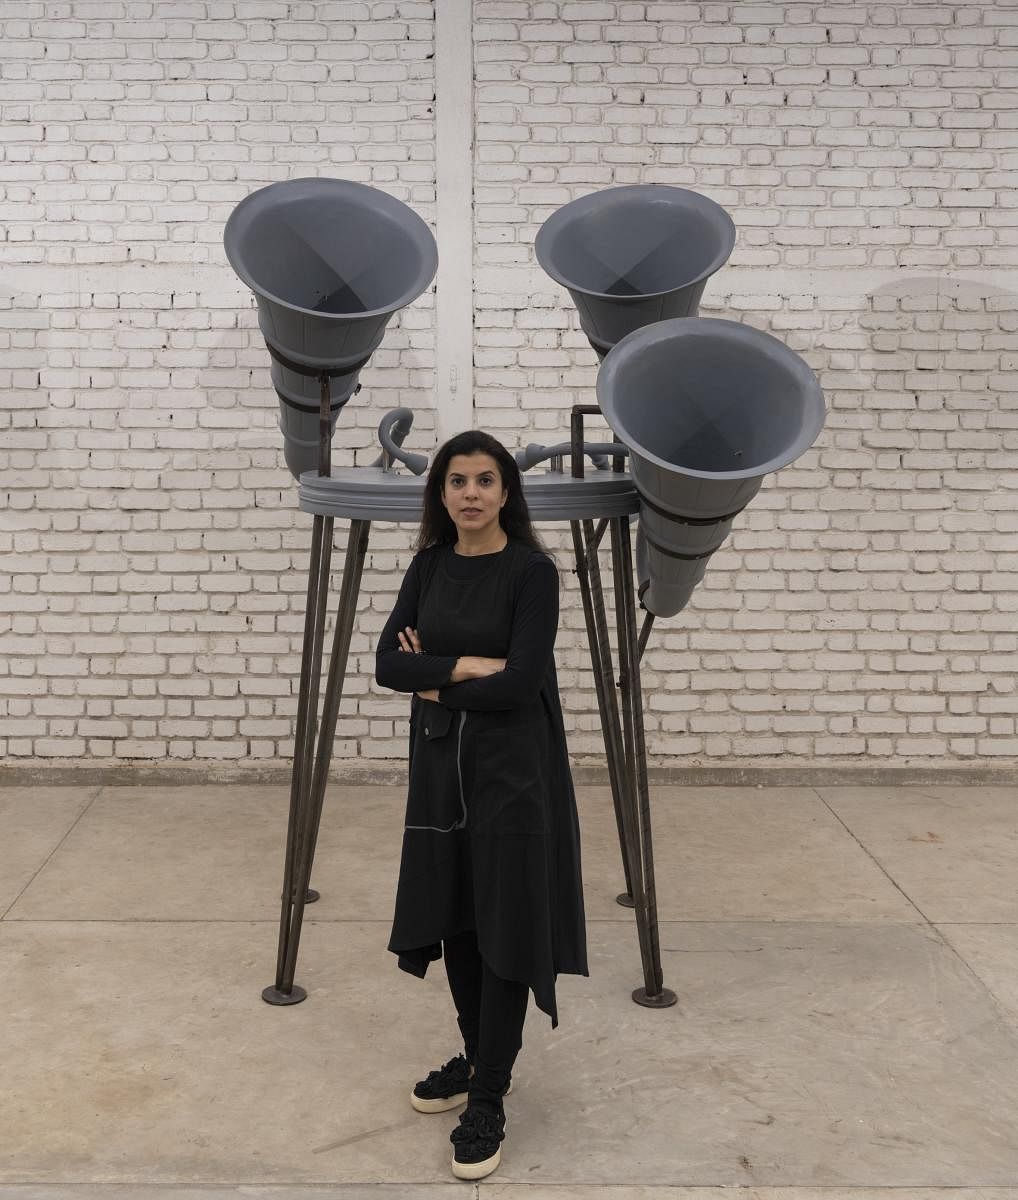 Reena Kallat with one of her sculptures at her solo show 'Blind Spots'.